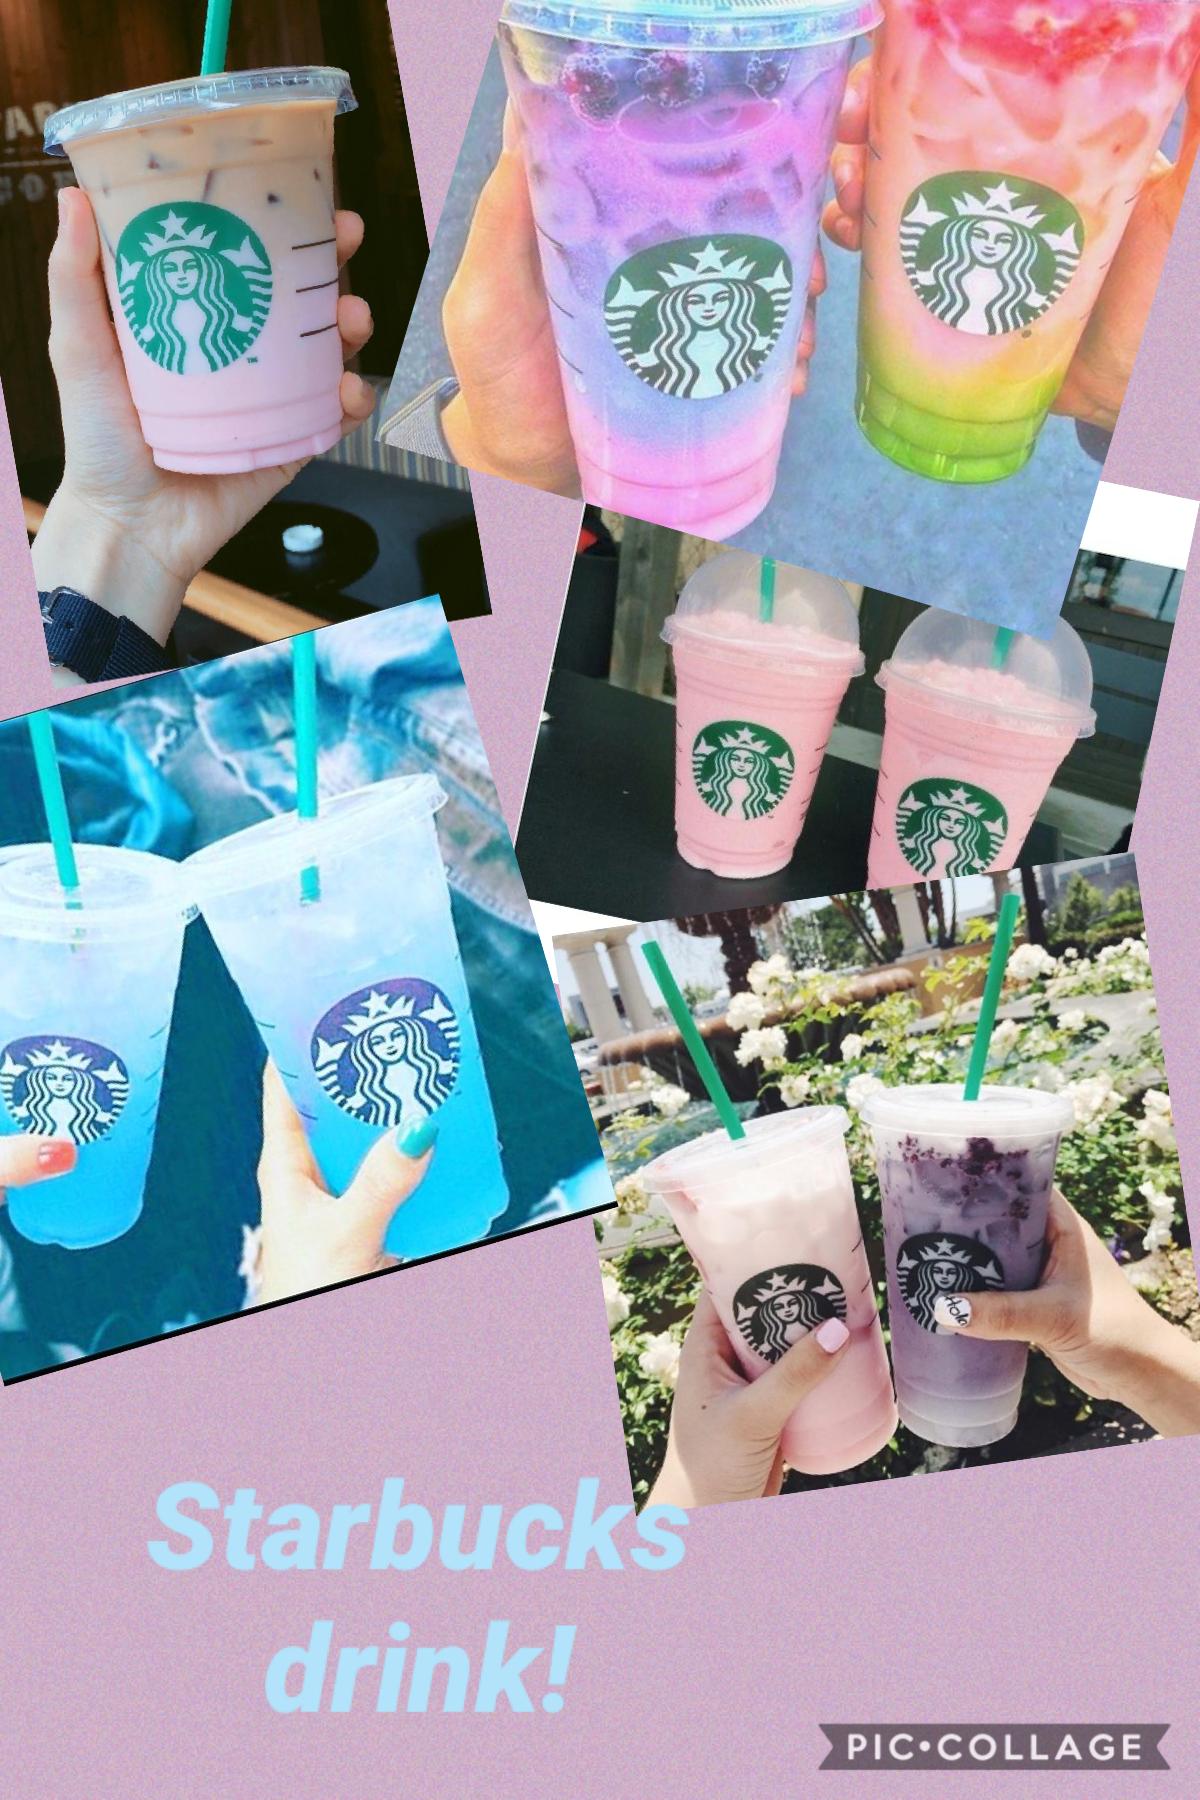 Starbucks drinks! 
Comment which one is your favourite 